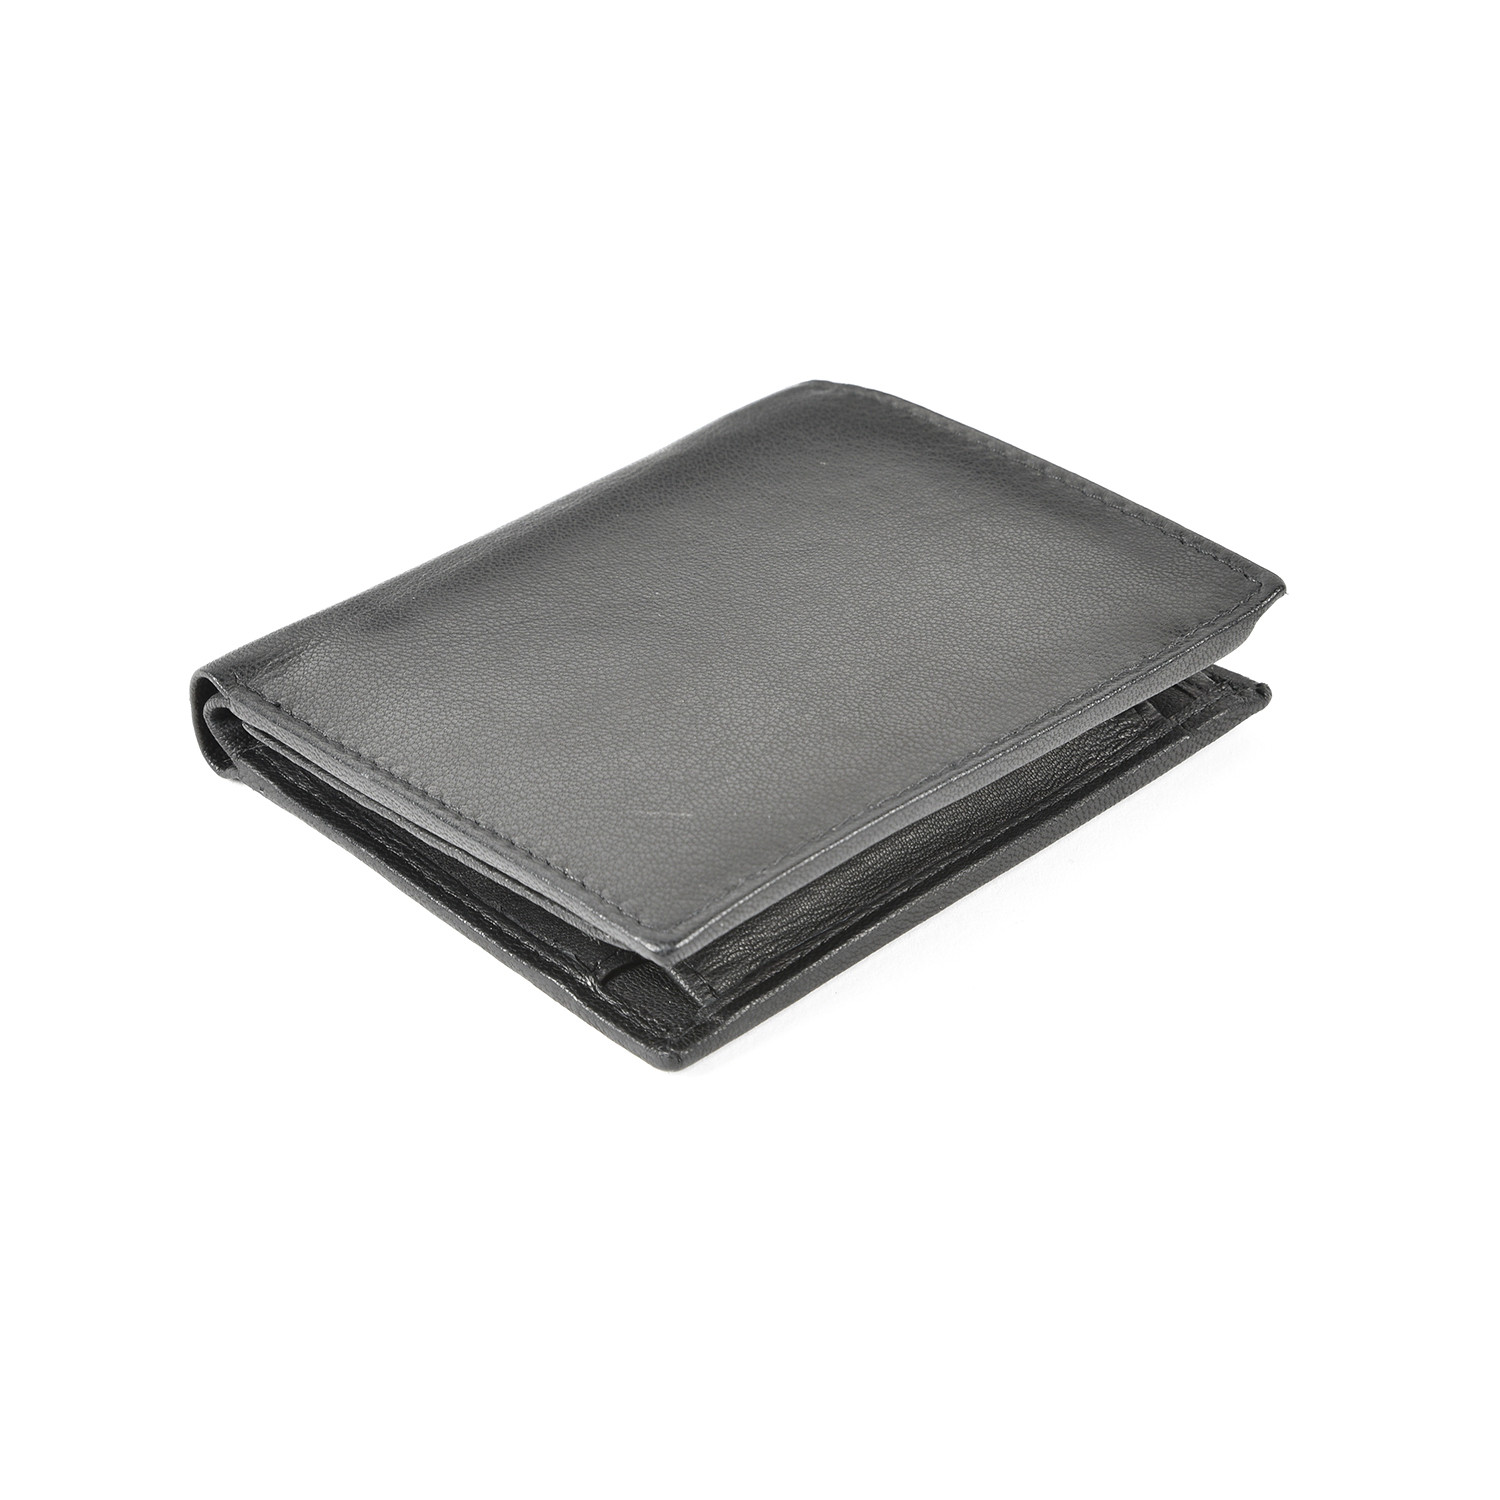 Clasp-Free Leather Wallet - Black Image 1